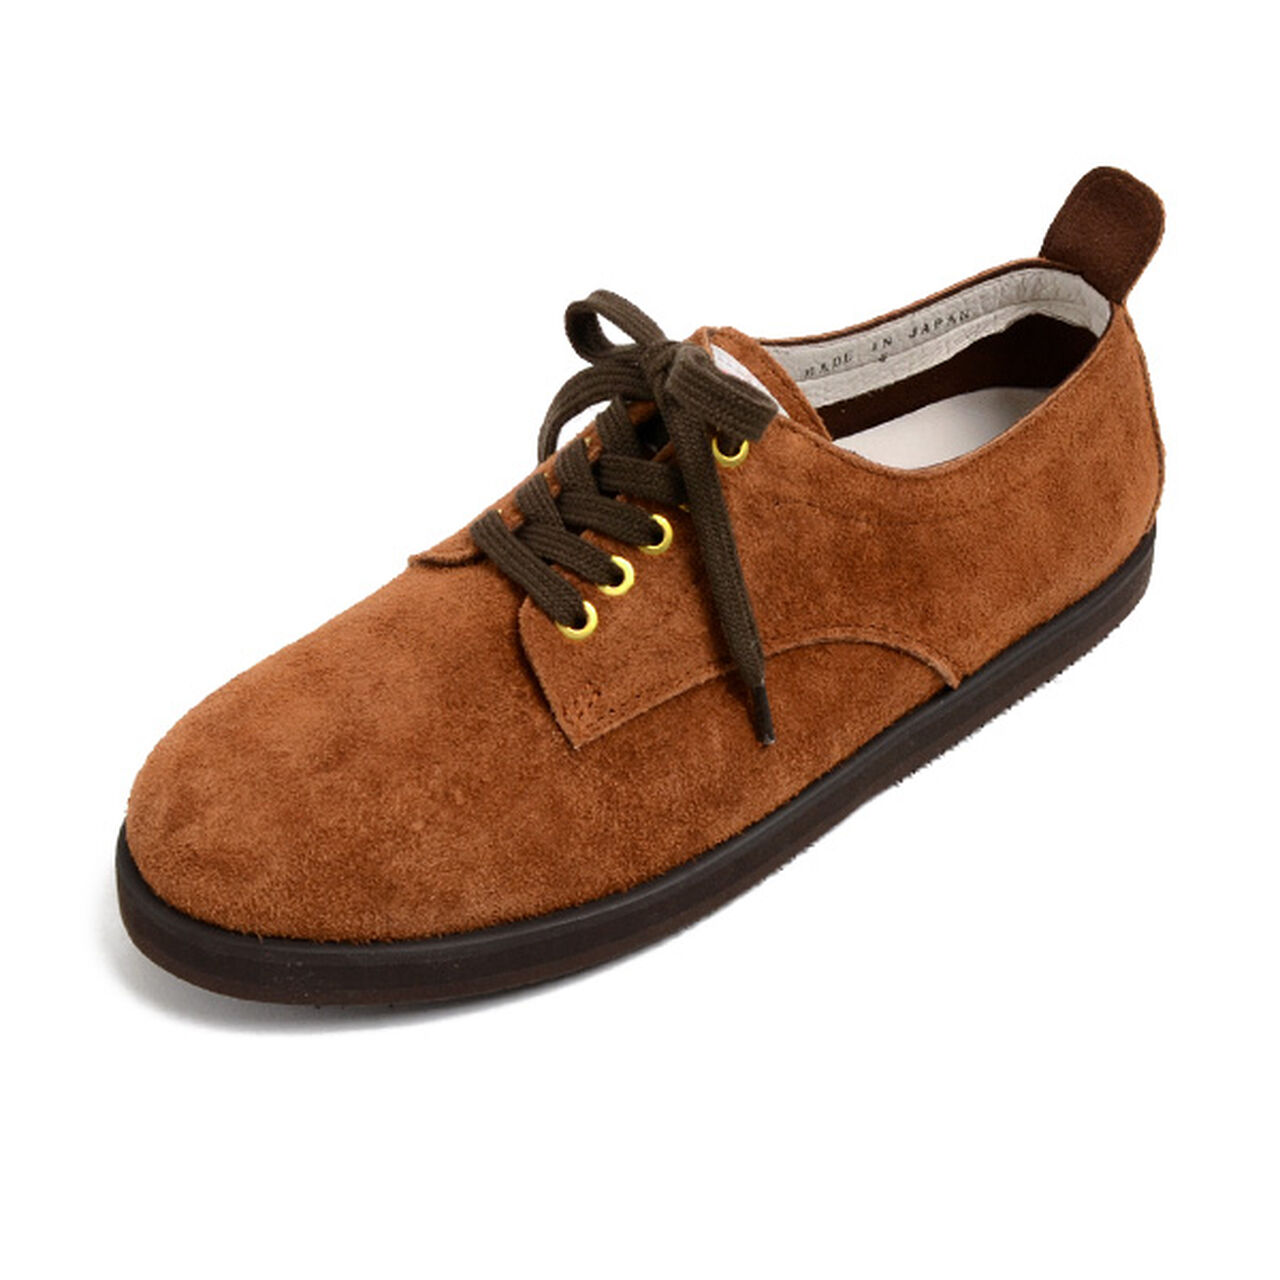 Riesel / Suede Leather Shoes,Brown, large image number 0